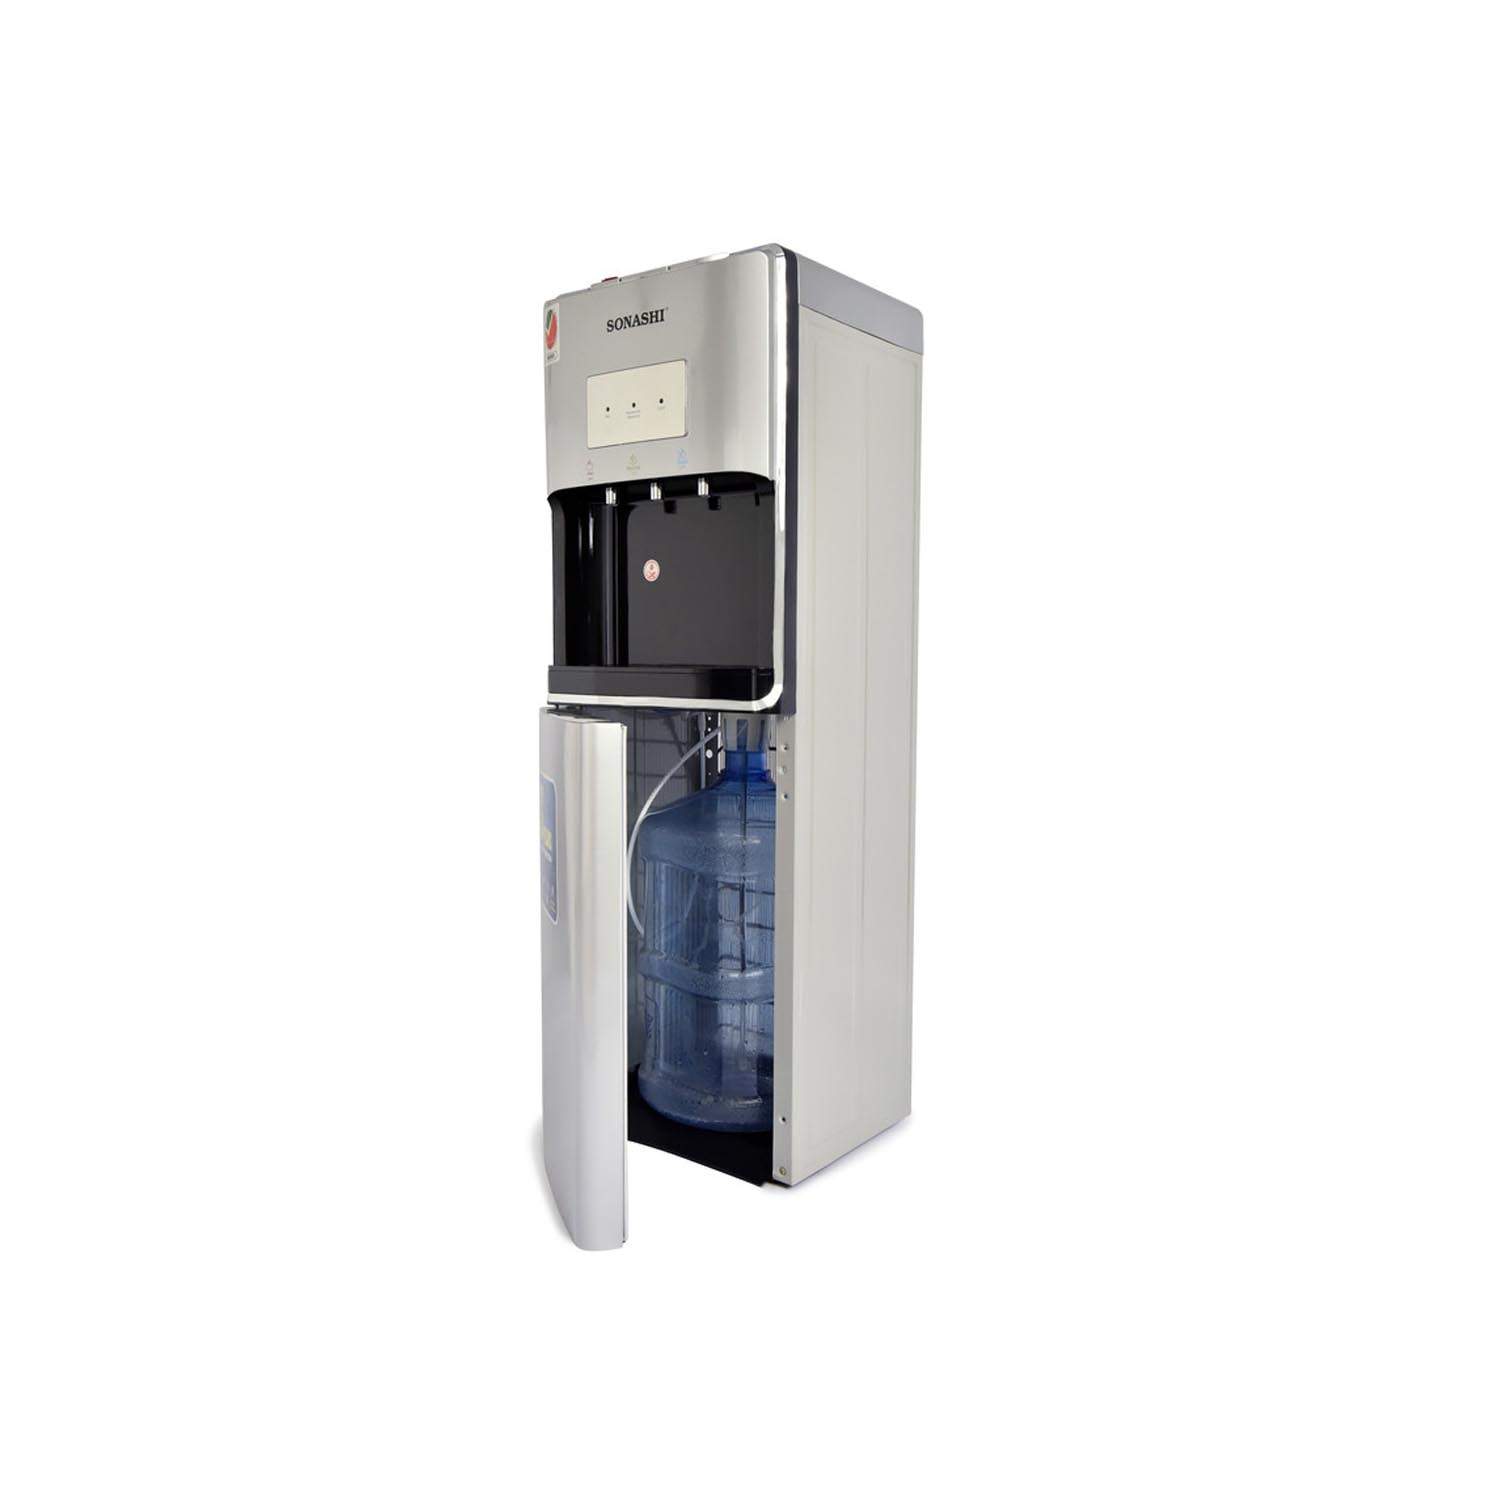 Sonashi 3 Tap Hot & Cold Standing Water Dispenser - Silver